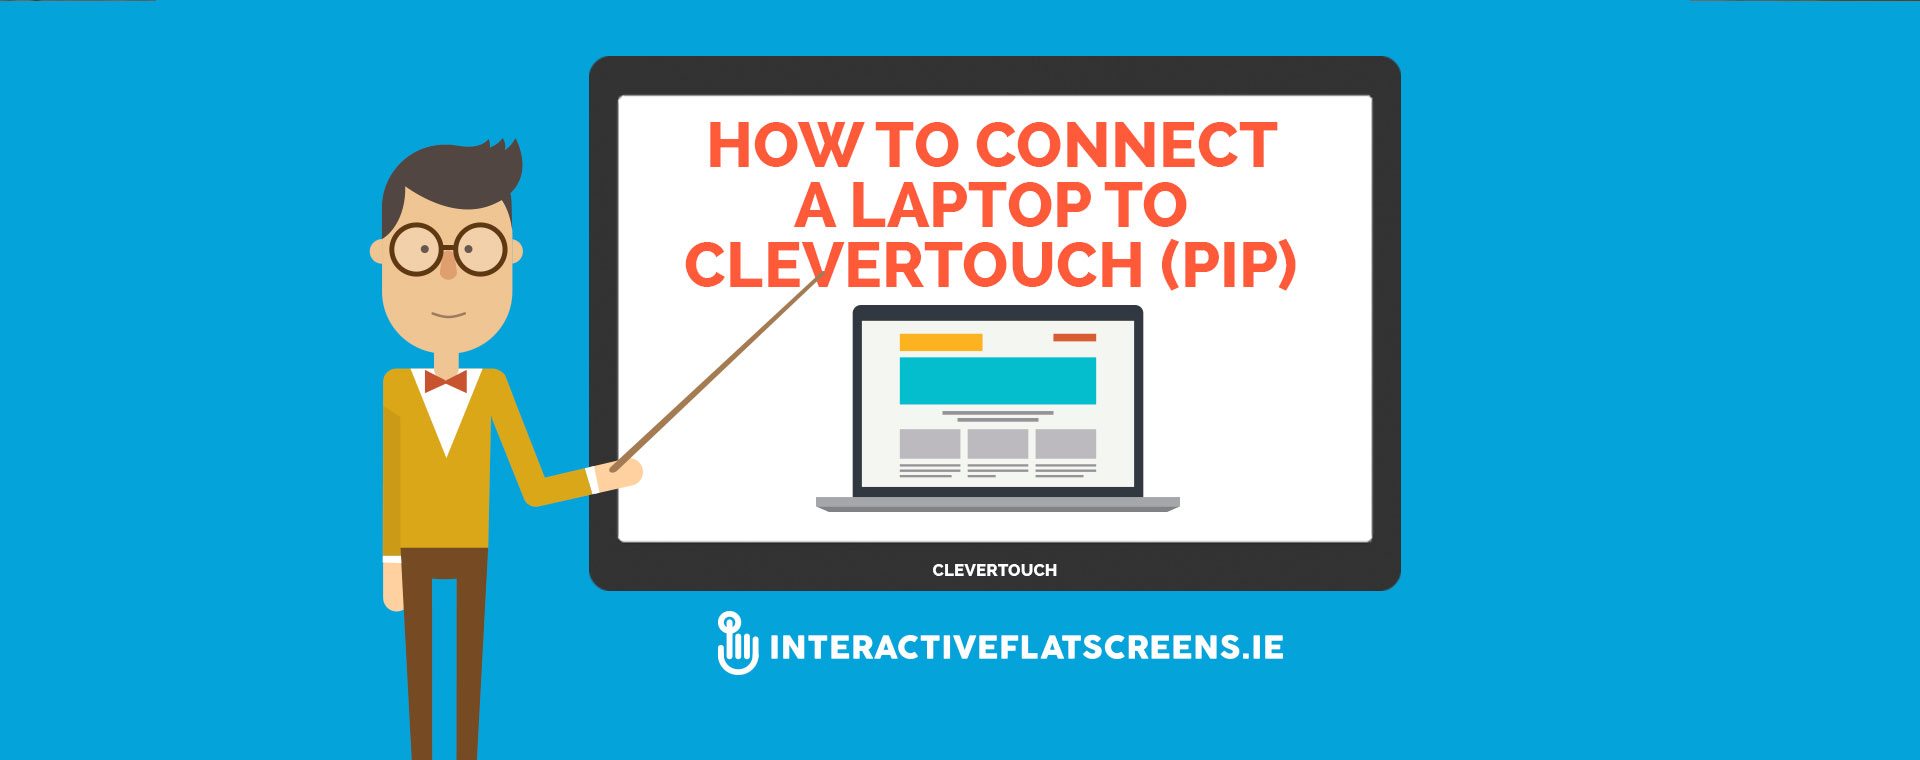 How to Connect a Laptop to Clevertouch - Interactive Flat Screens Dublin